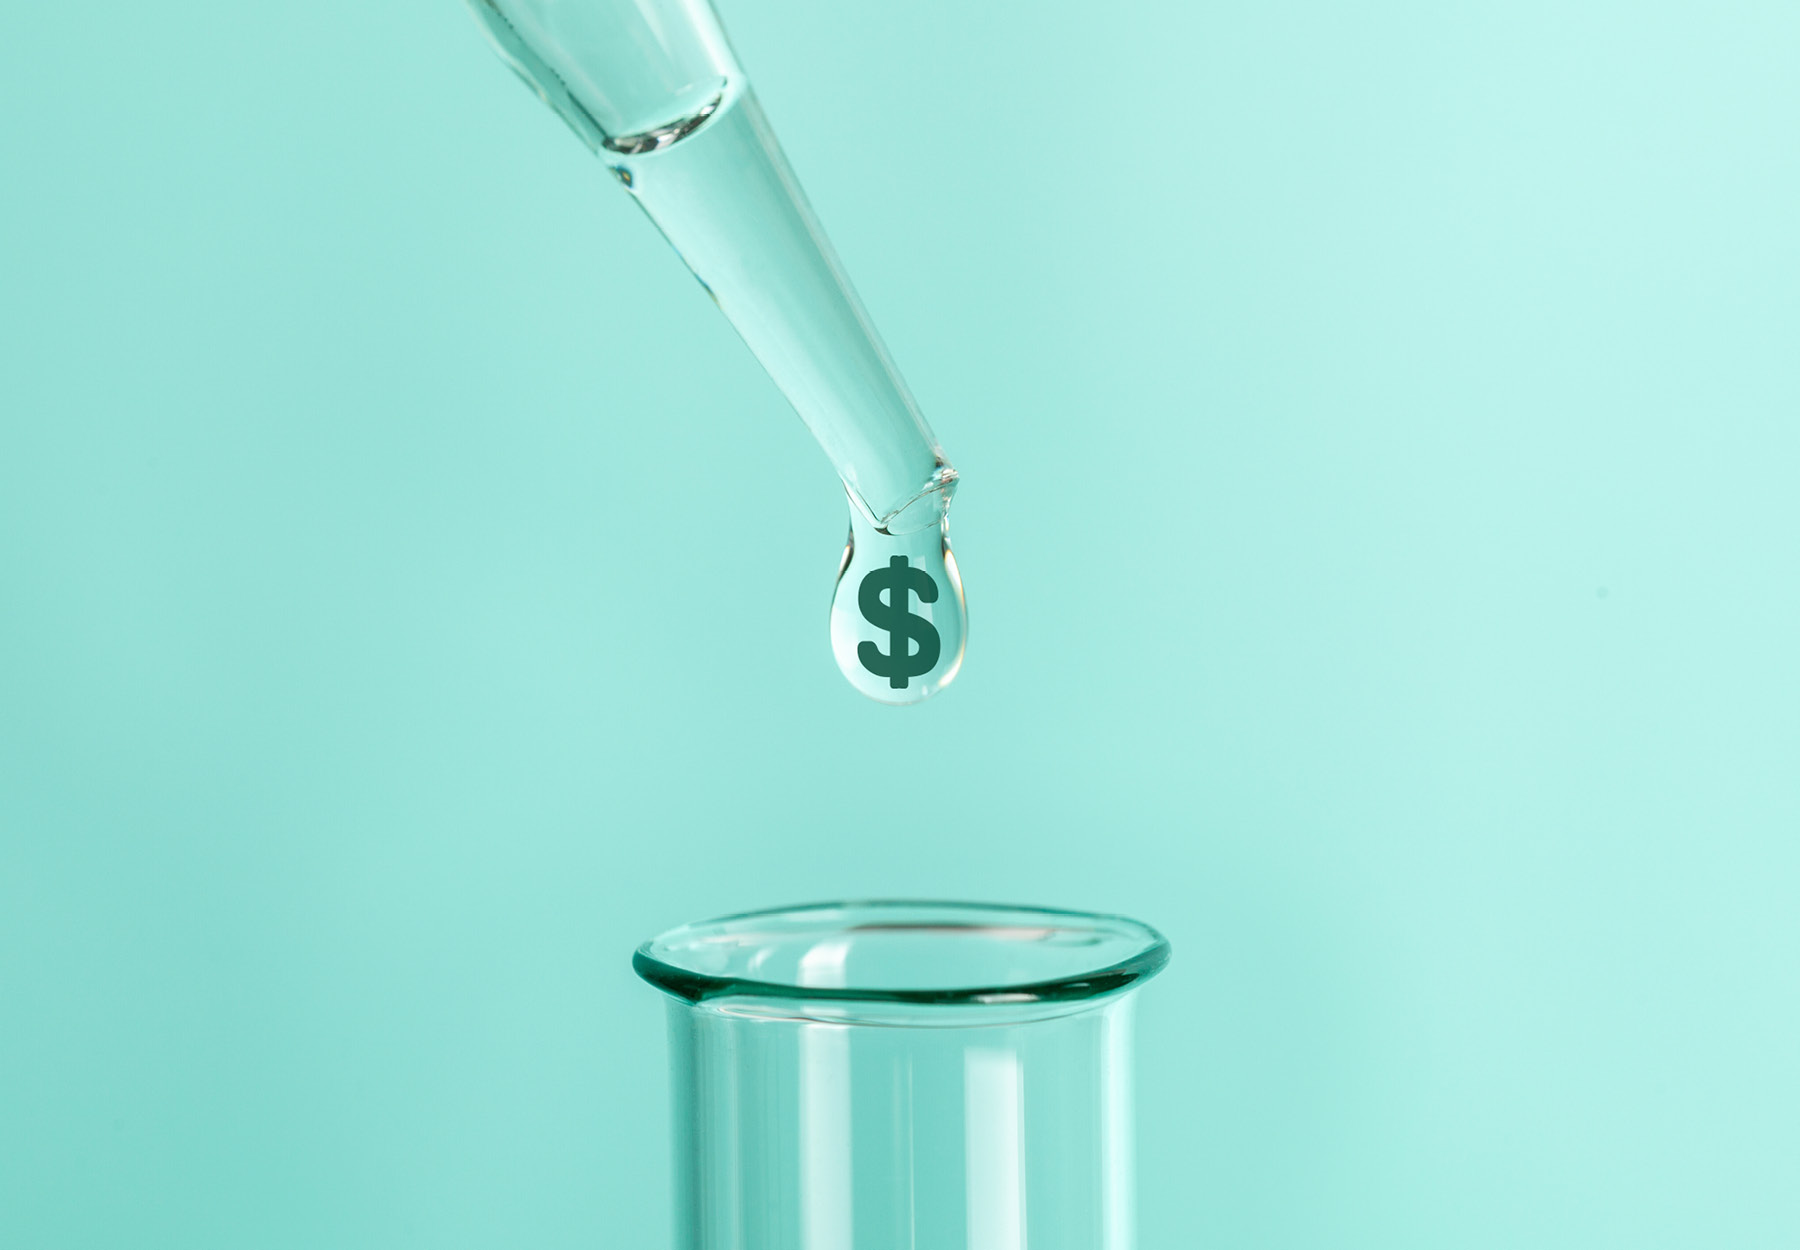 Stock photo illustration of a pipette dripping liquid with a dollar sign in it into a test tube to show the concept of laboratory test pricing